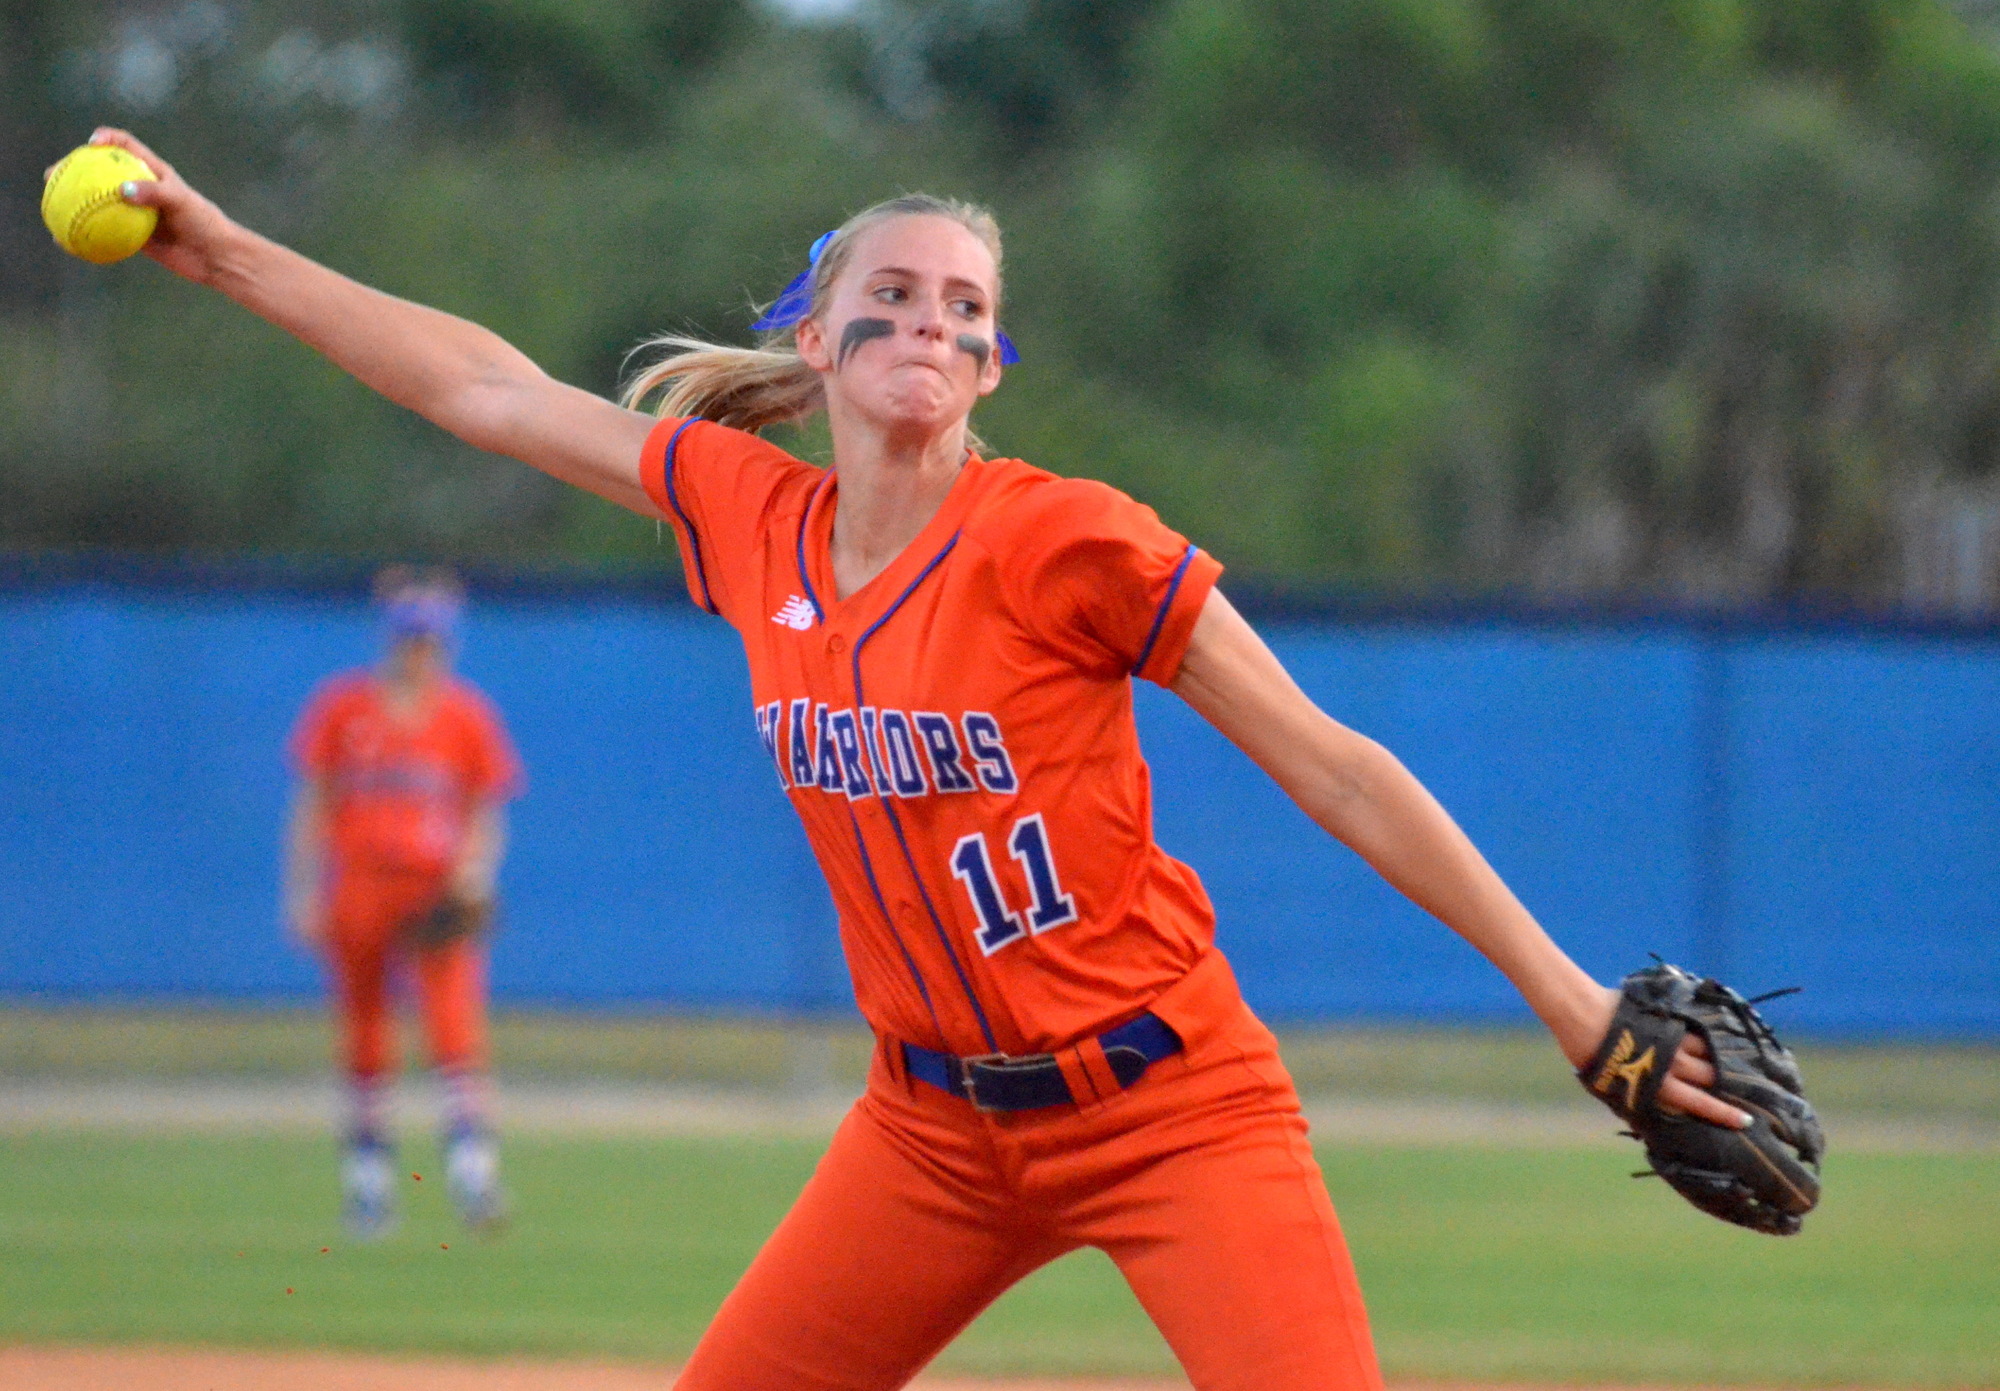 The Warriors have been cautious with ace pitcher Lauren Mathis.